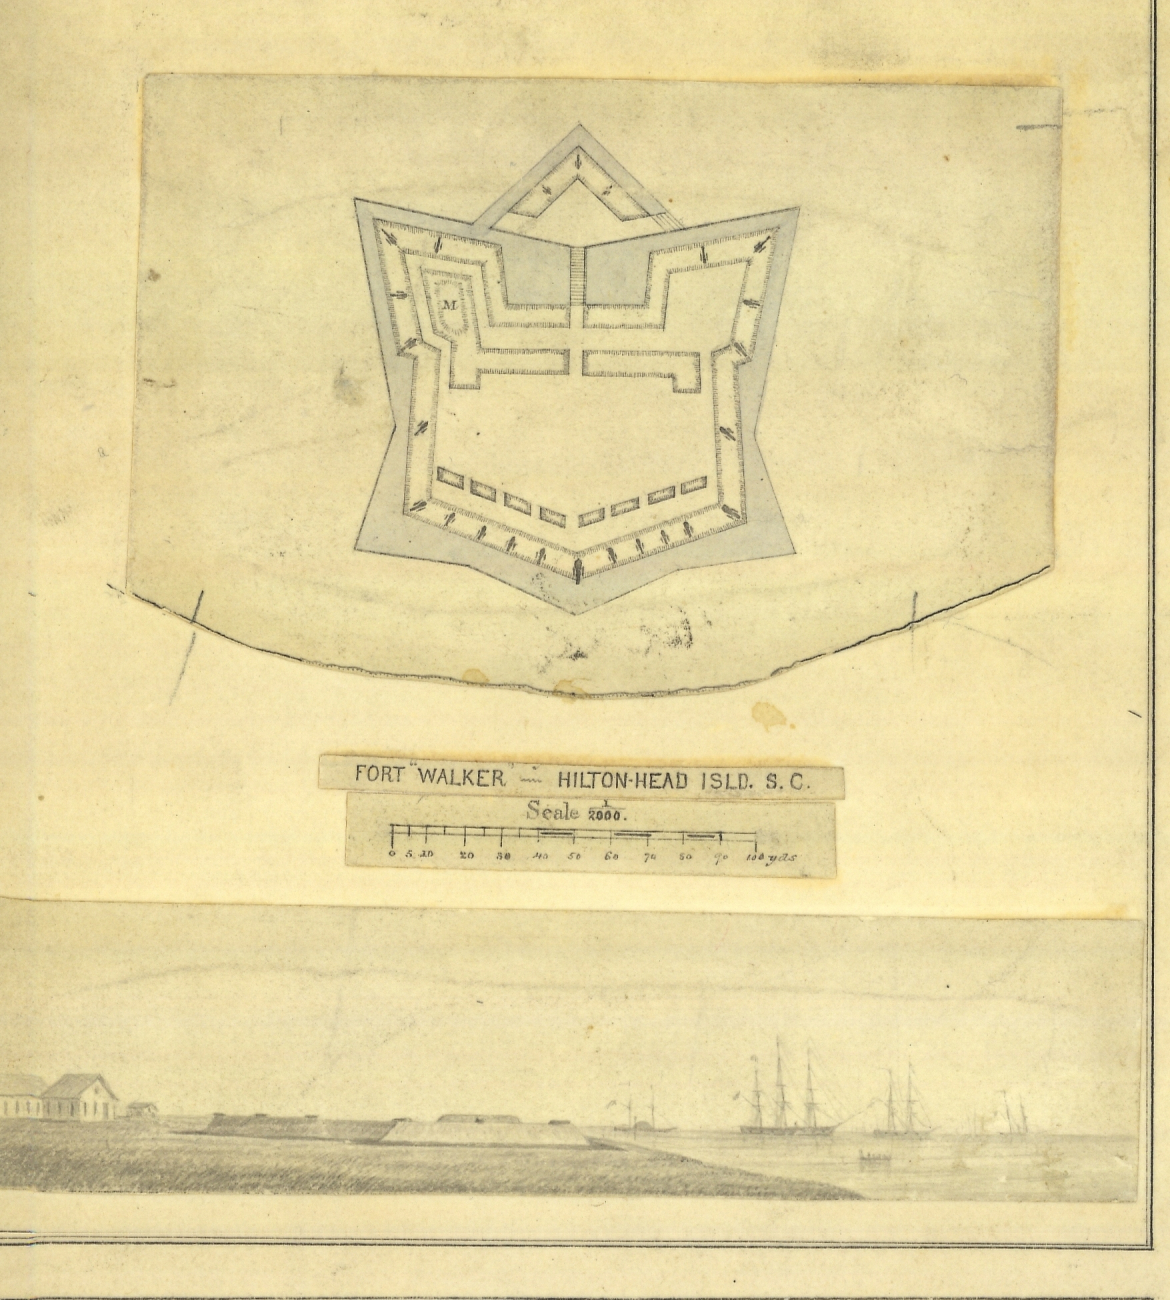 View of Fort Walker - Hilton Head Island from cgs05197 Plans and Viewsof Rebel Defences coast of South Carolina